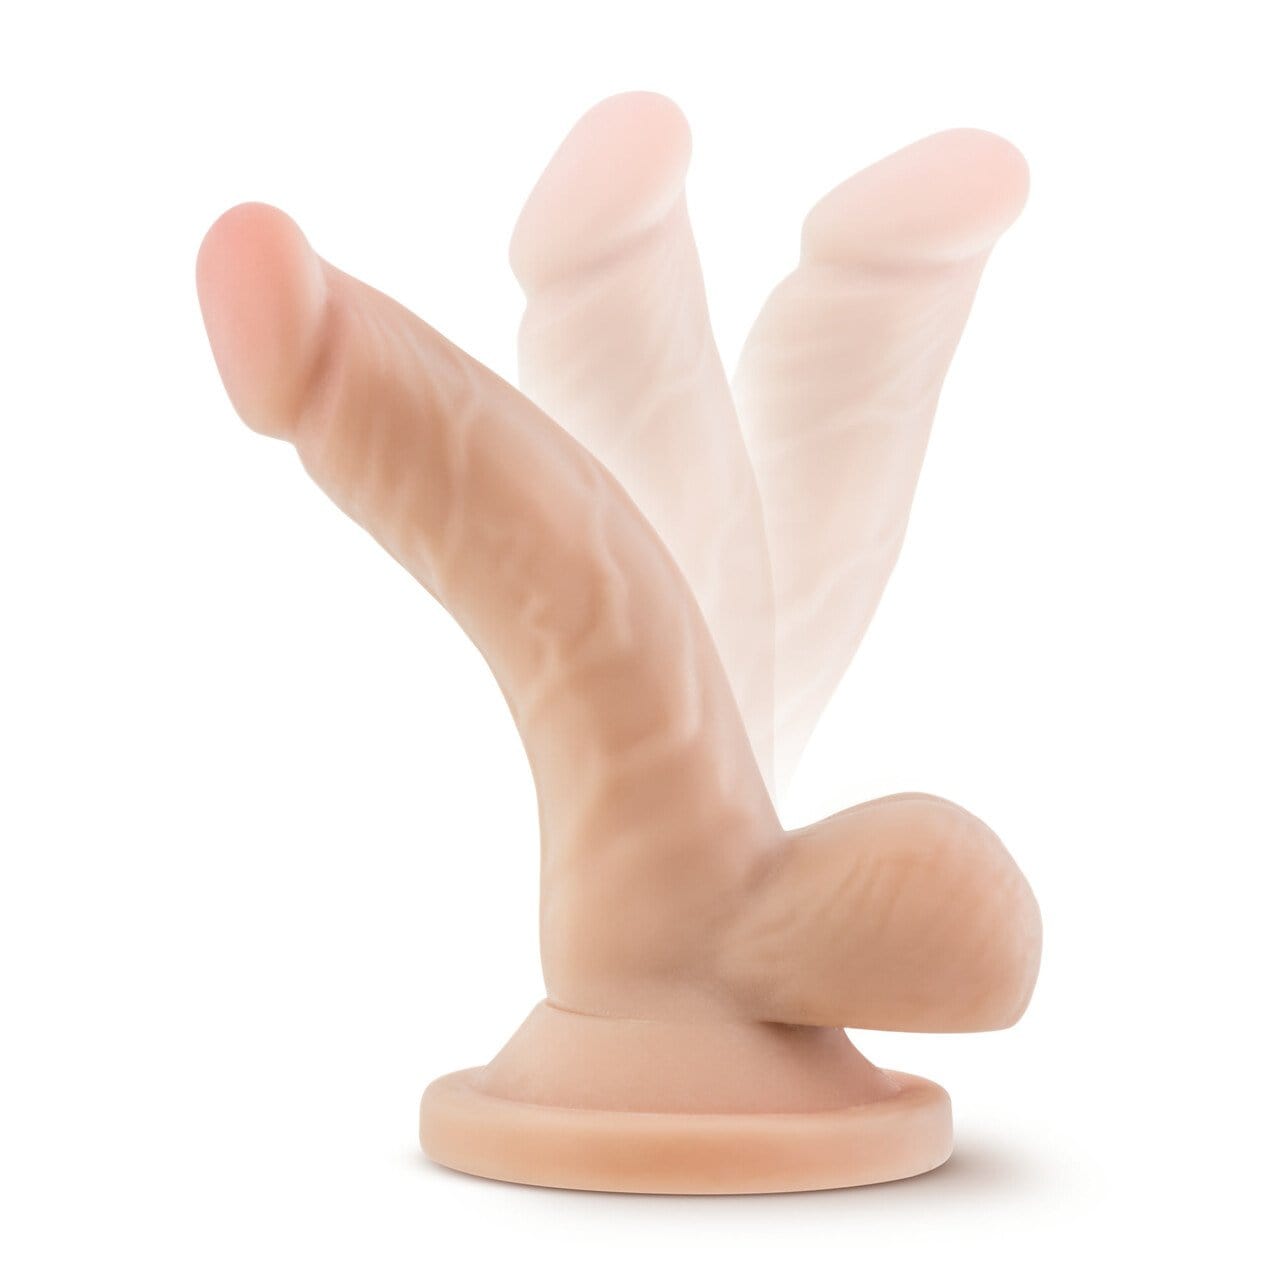 Dr. Skin 4" Mini Cock - Beige - Thorn & Feather